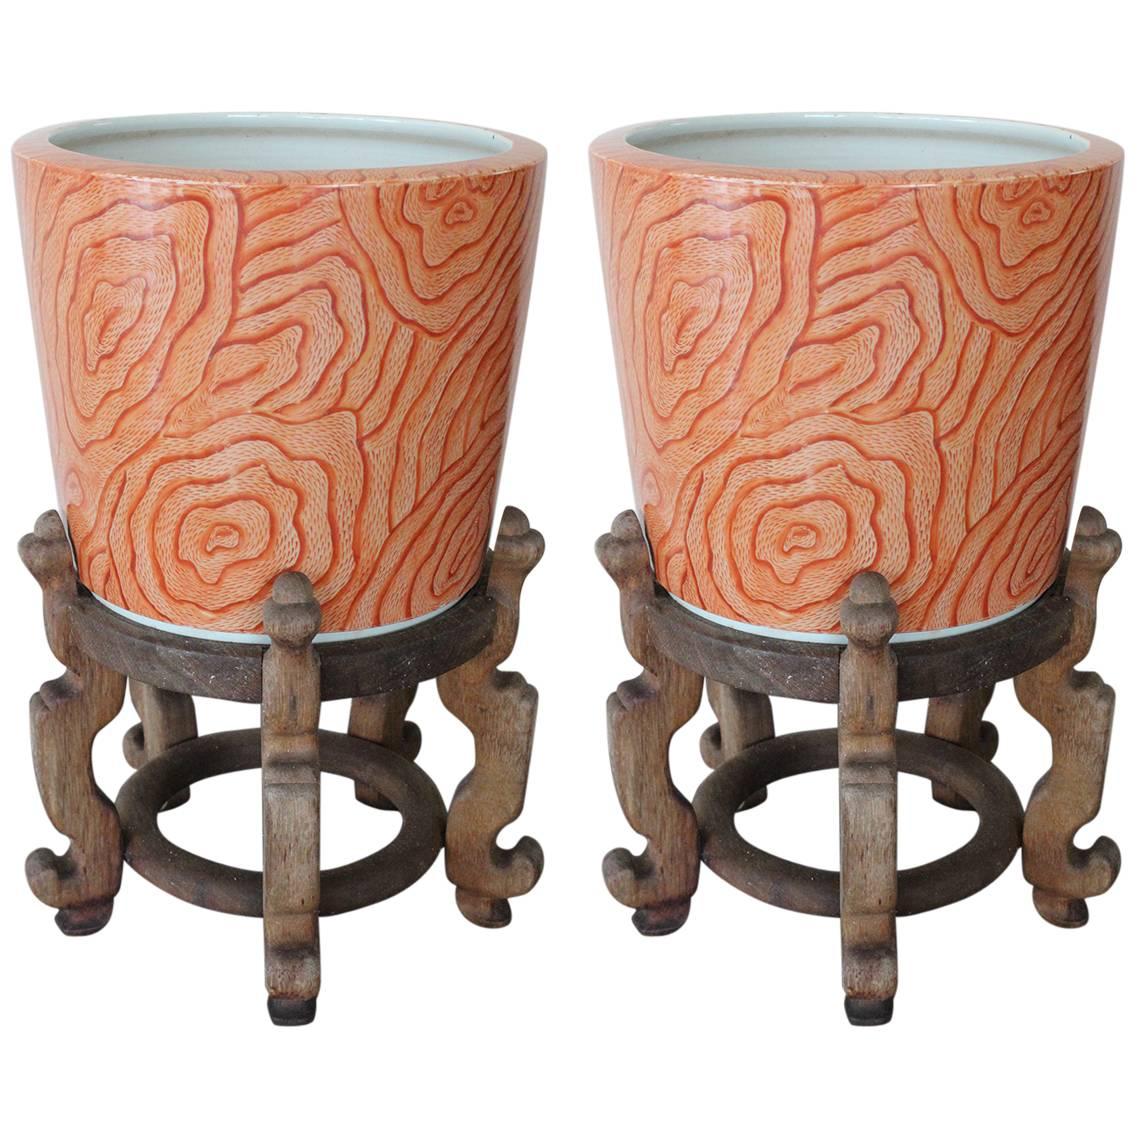 Pair of Asian Style Cachepots Attributed to Karl Springer